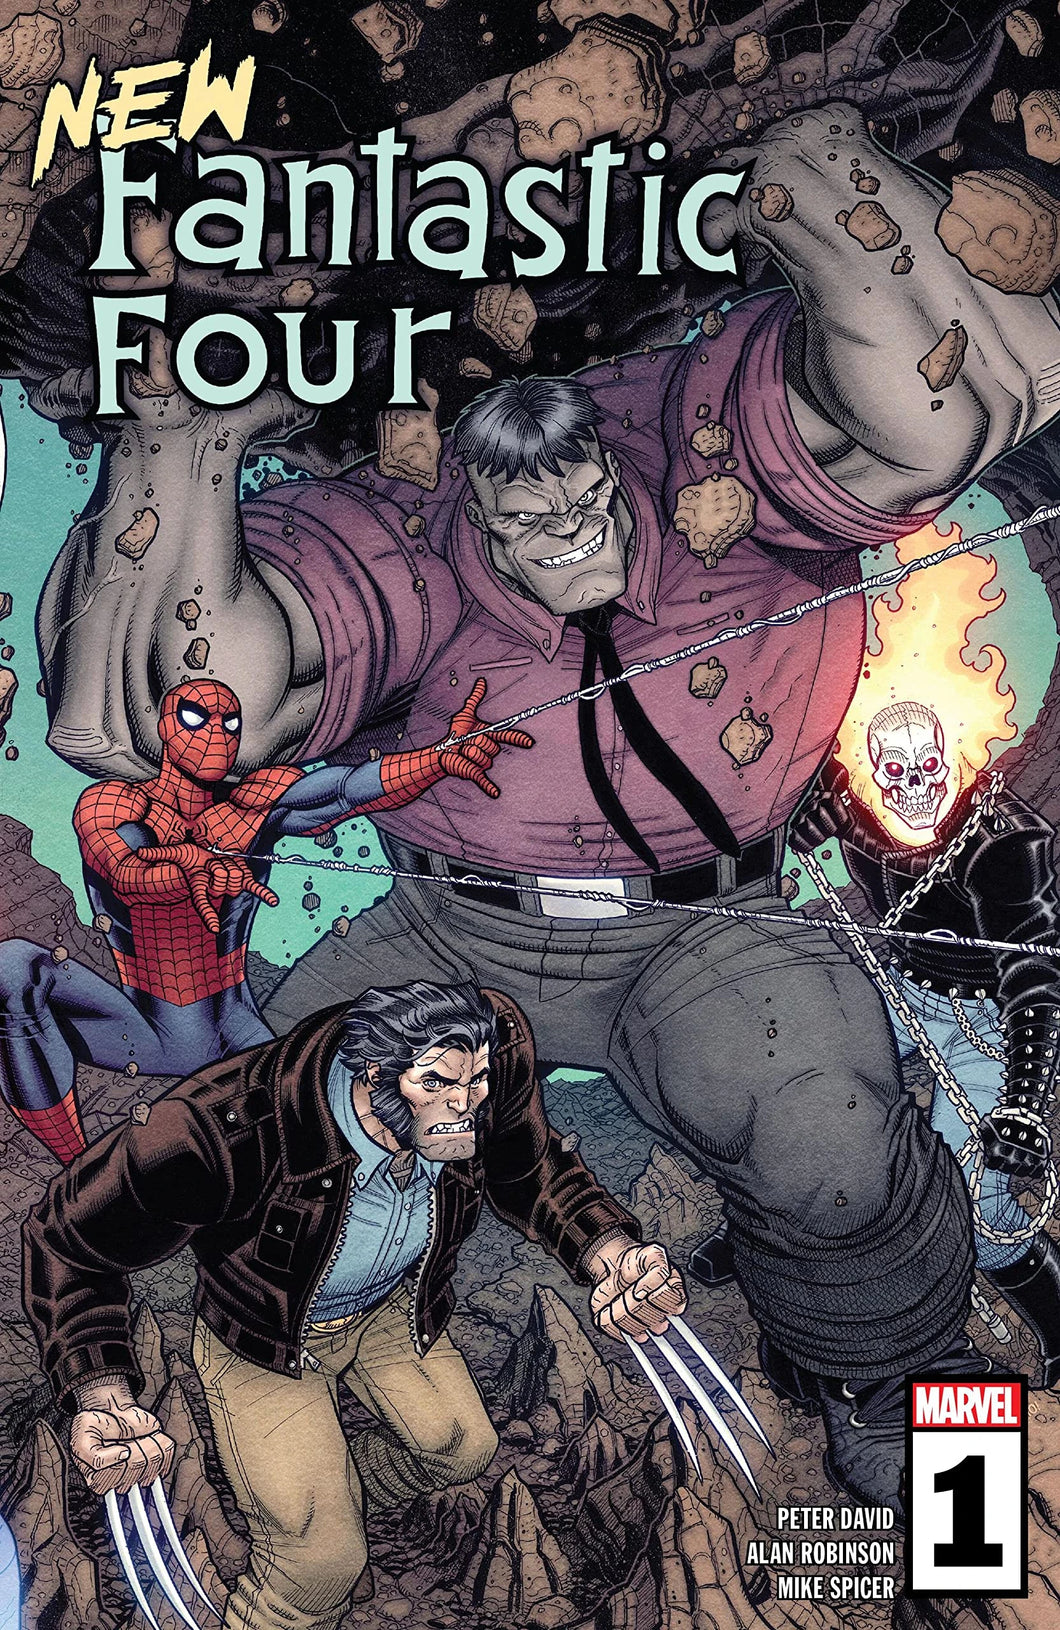 NEW FANTASTIC FOUR #1 (OF 5) (06/22/2022)